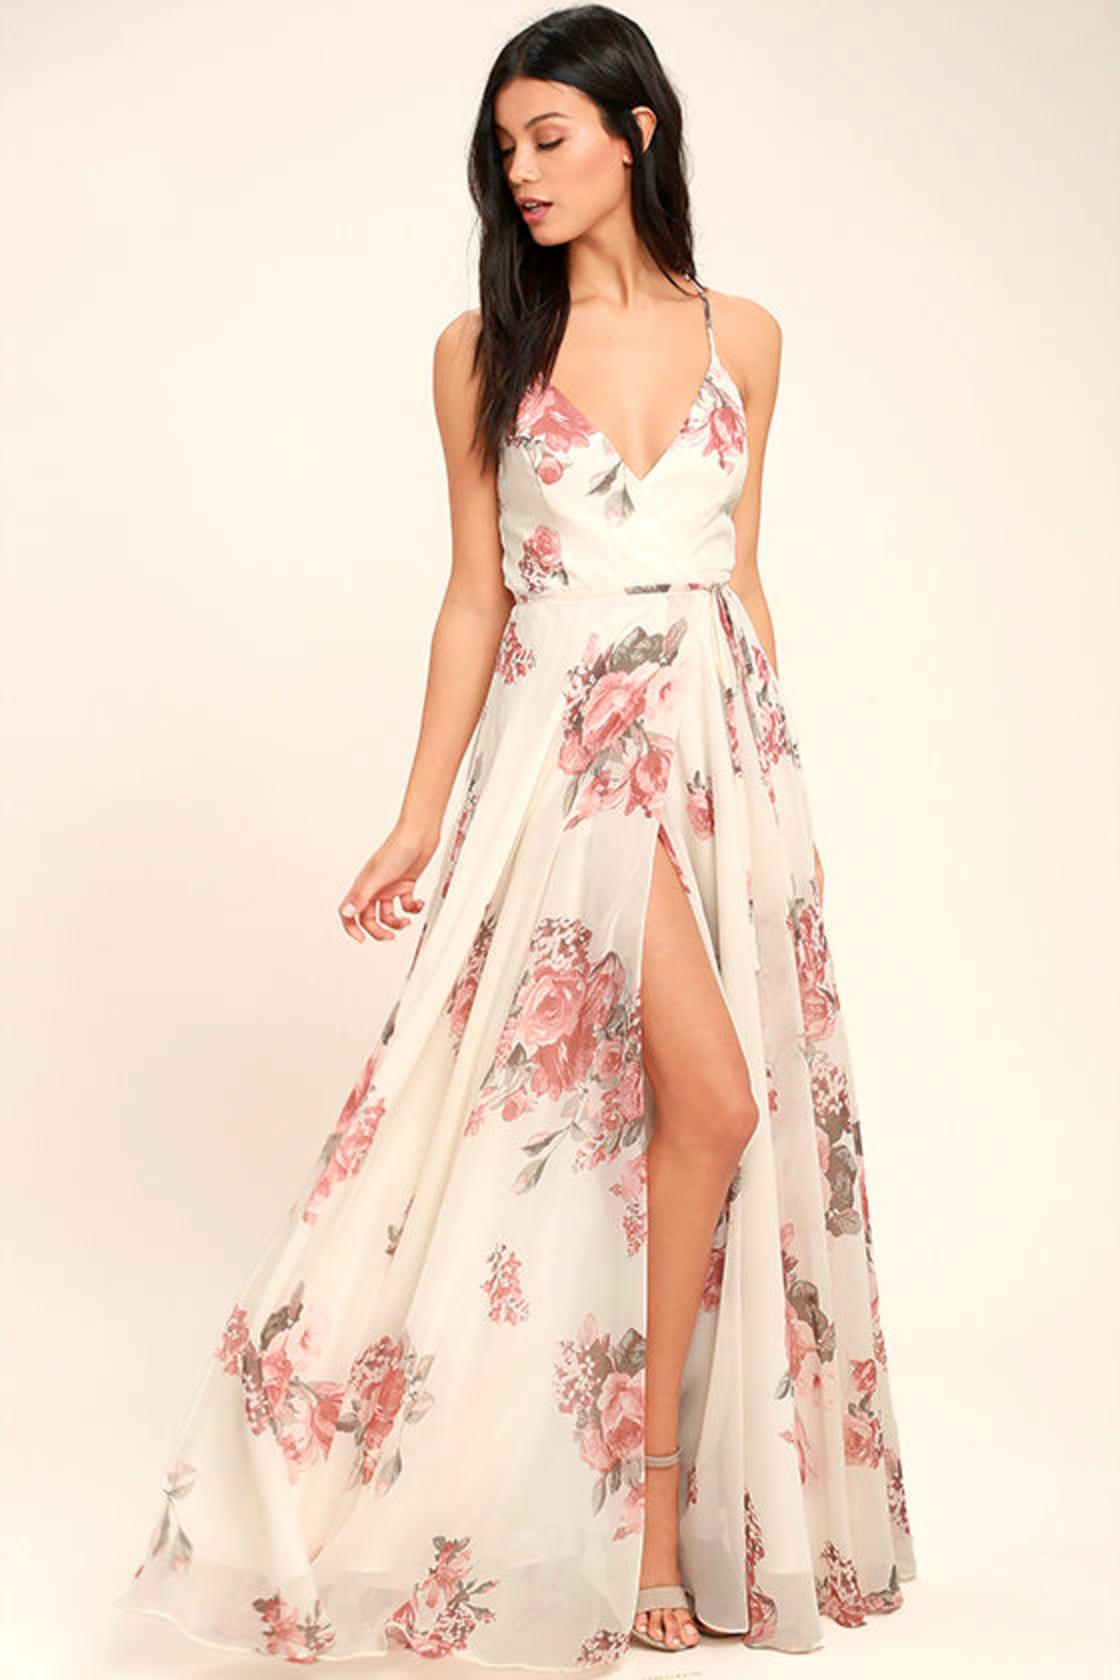 Elegantly Inclined Cream Floral Print Wrap Maxi Dress